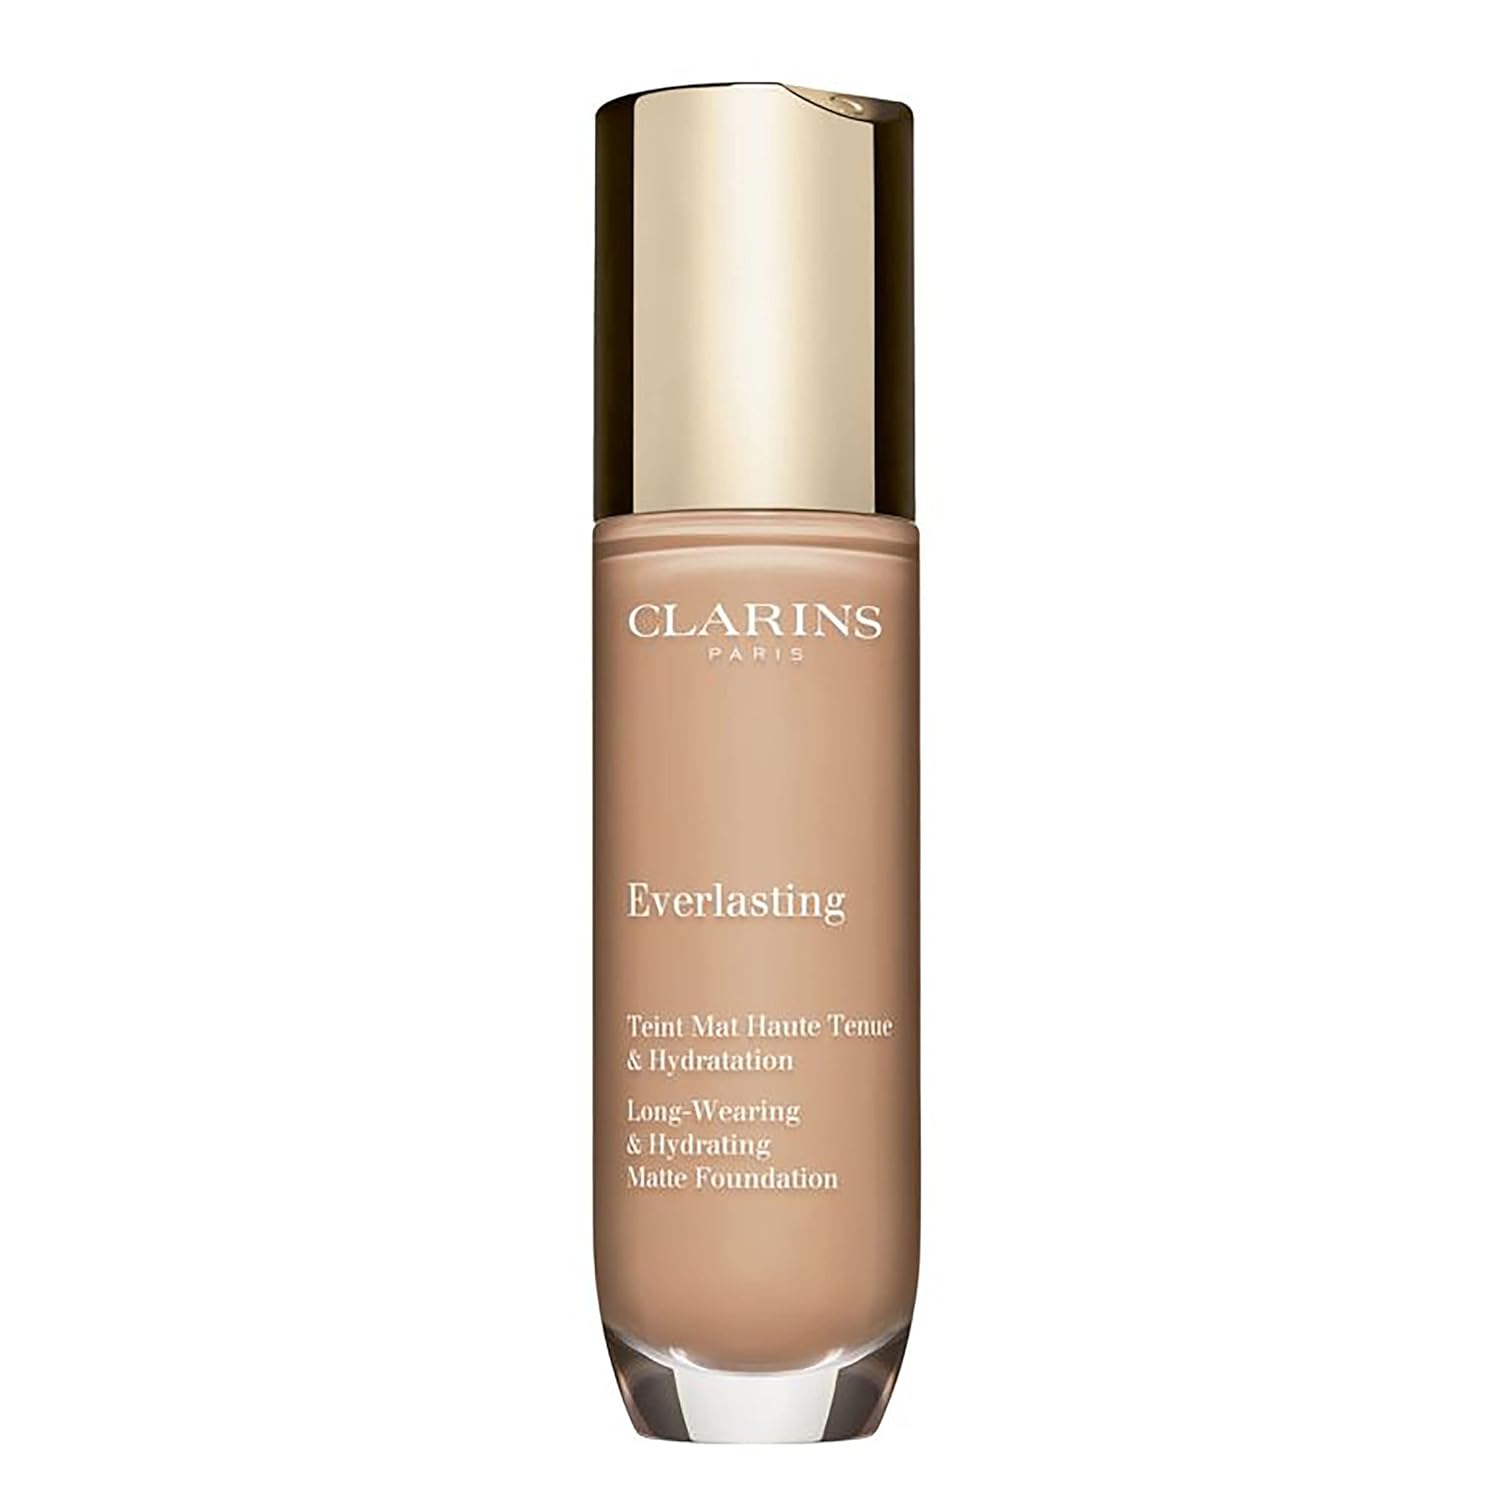 Clarins Everlasting Foundation | Full Coverage and Long-Wearing | Hides Imperfections, Evens Skin Tone and Provides 24-Hour Hydration and Hold